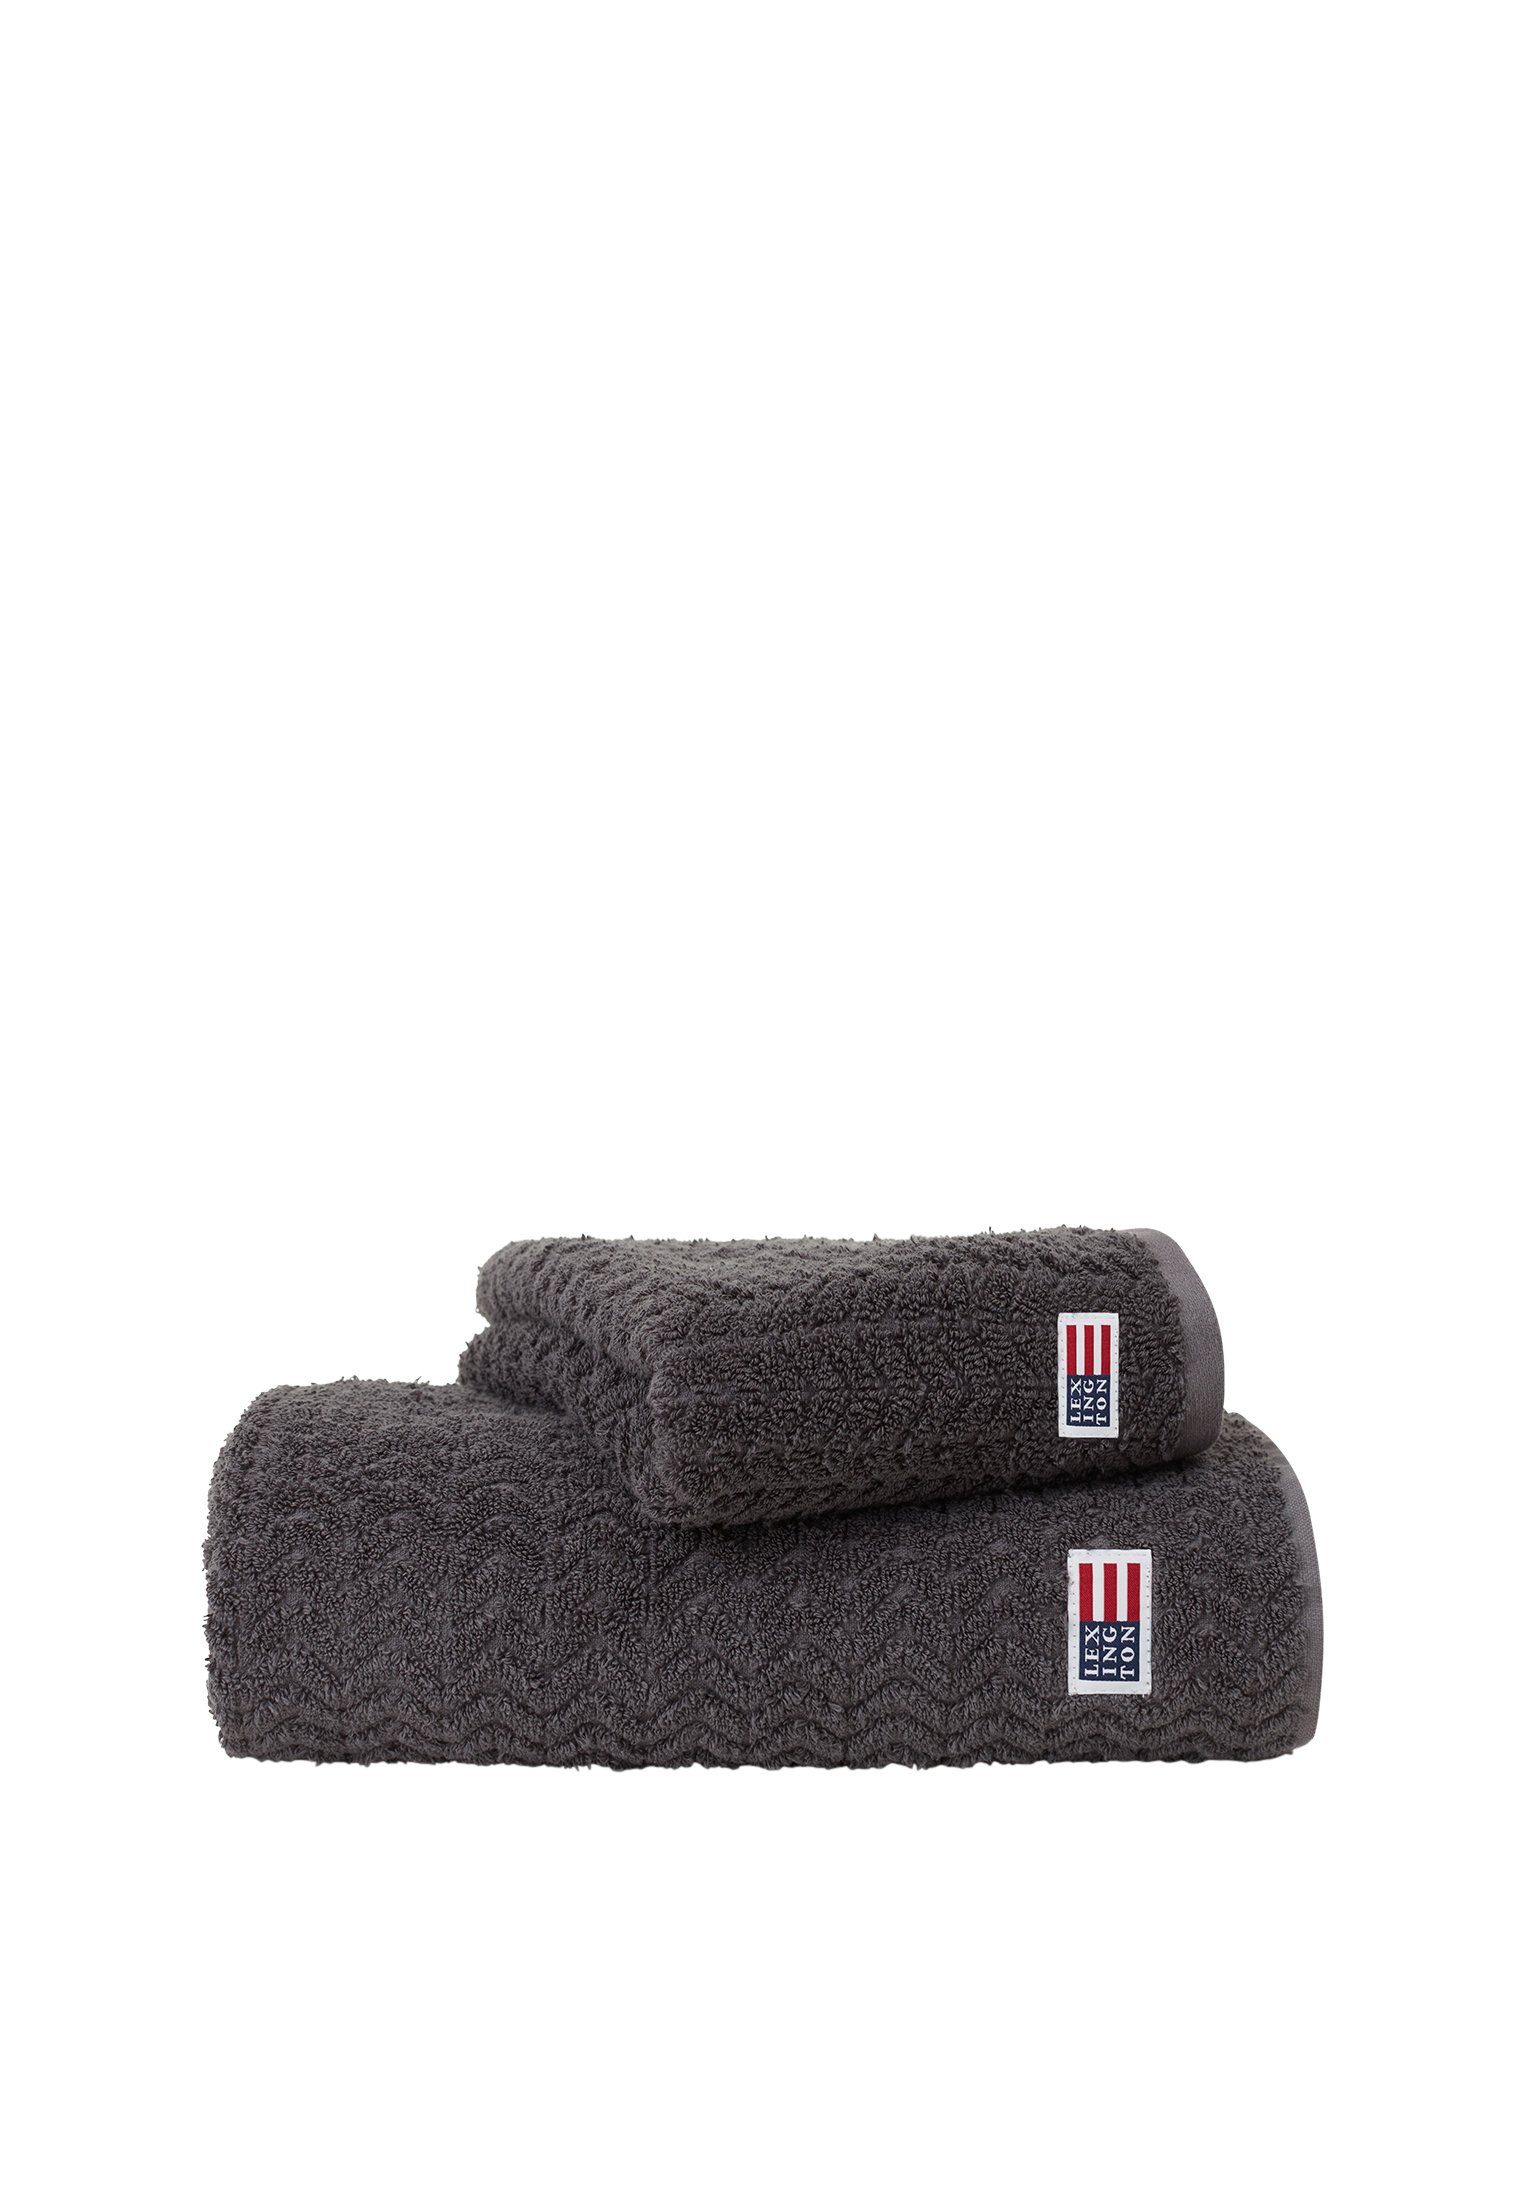 Lexington Structured Handtuch Towel Terry Cotton/Lyocell charcoal